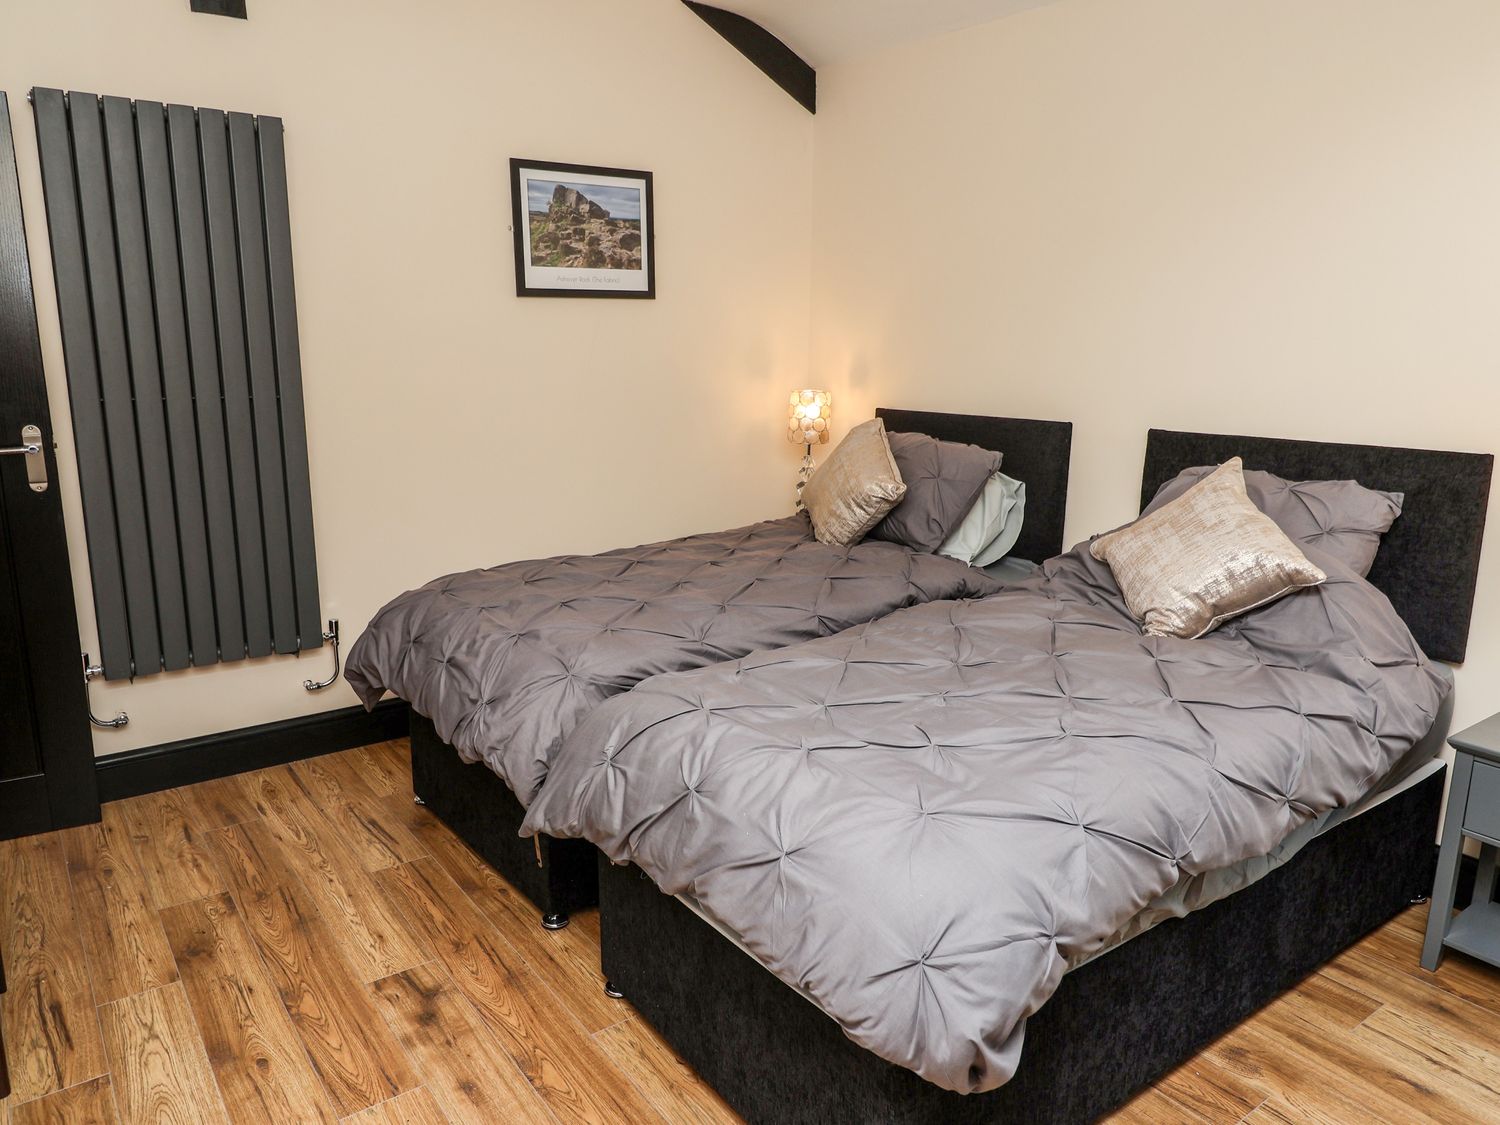 Moor Farm Cottage near Ashover, Derbyshire. Open-plan living space. Two bedrooms. Fully equipped gym